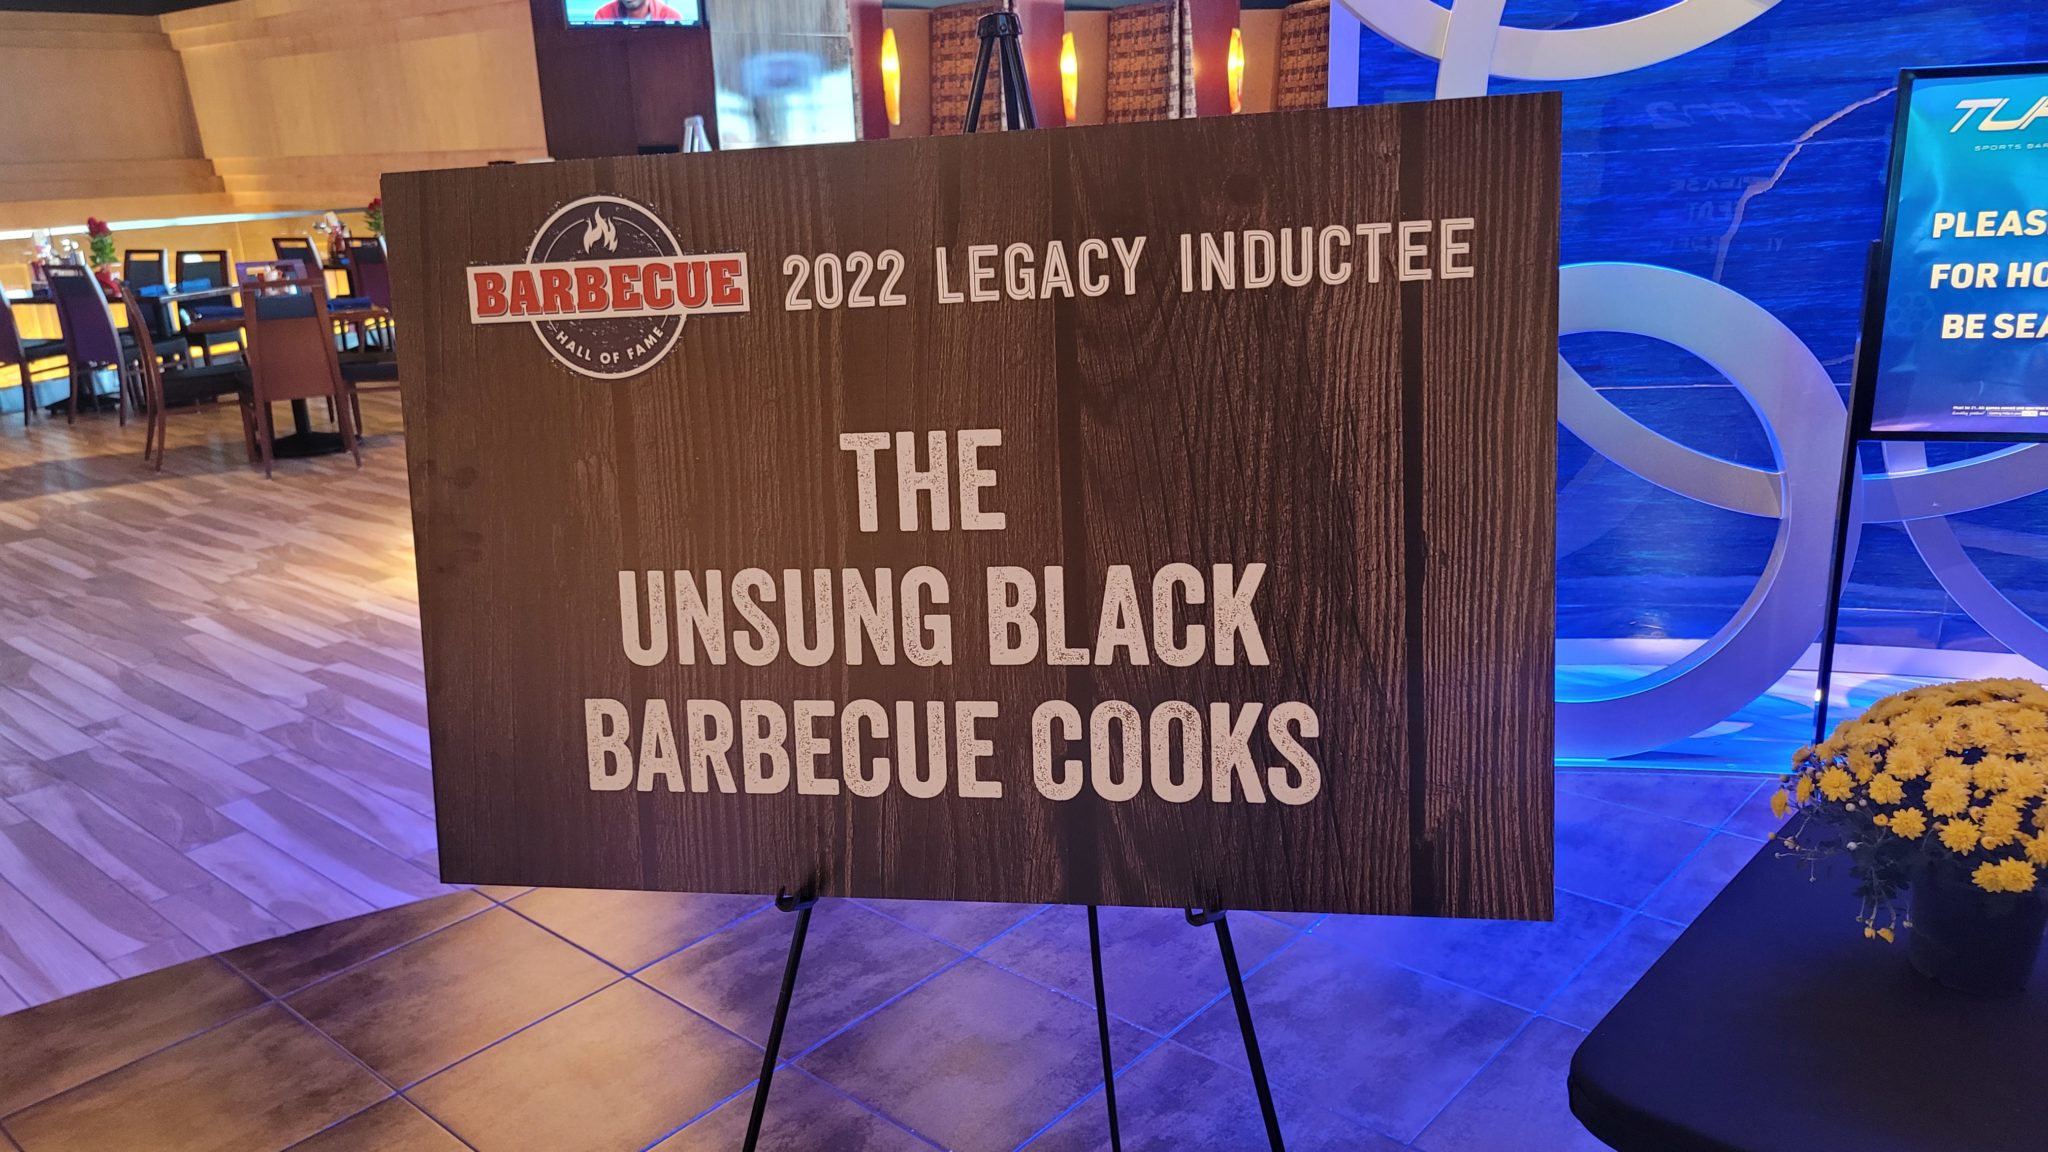 The American Royal Barbecue Hall of Fame Honors "Unsung Black Barbecue